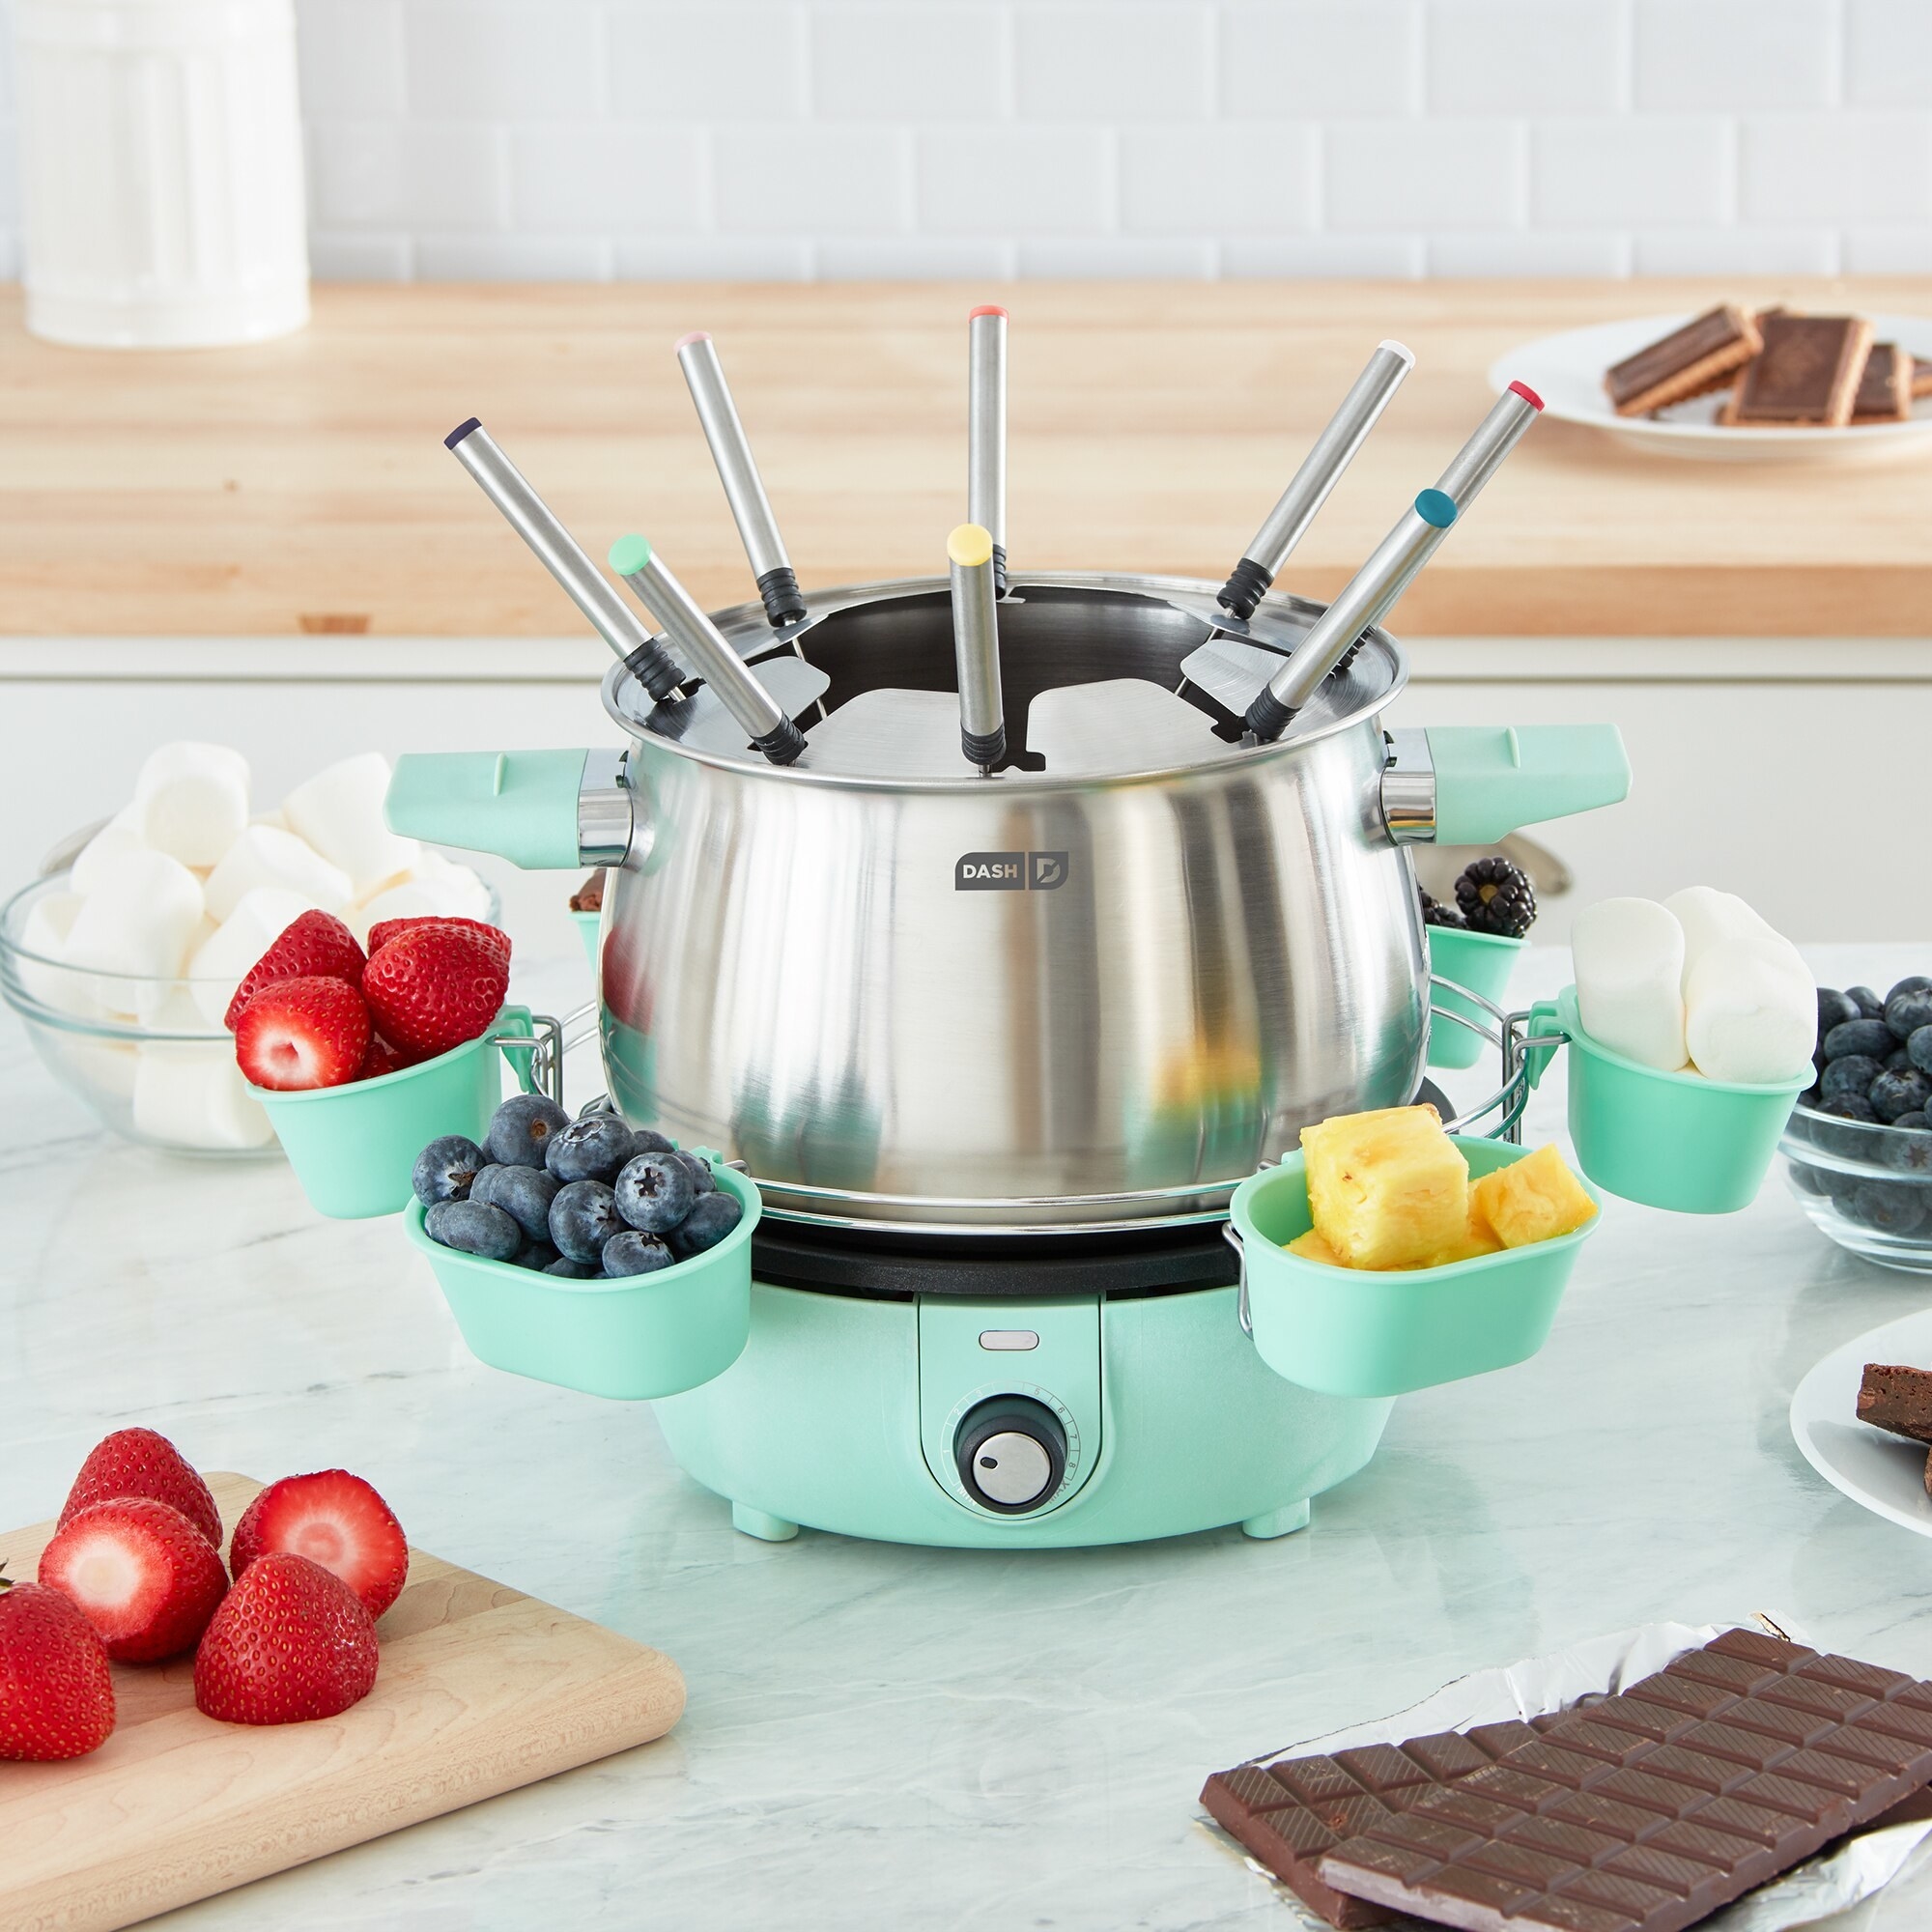 The fondue maker with fruit and marshmallows in its bowls